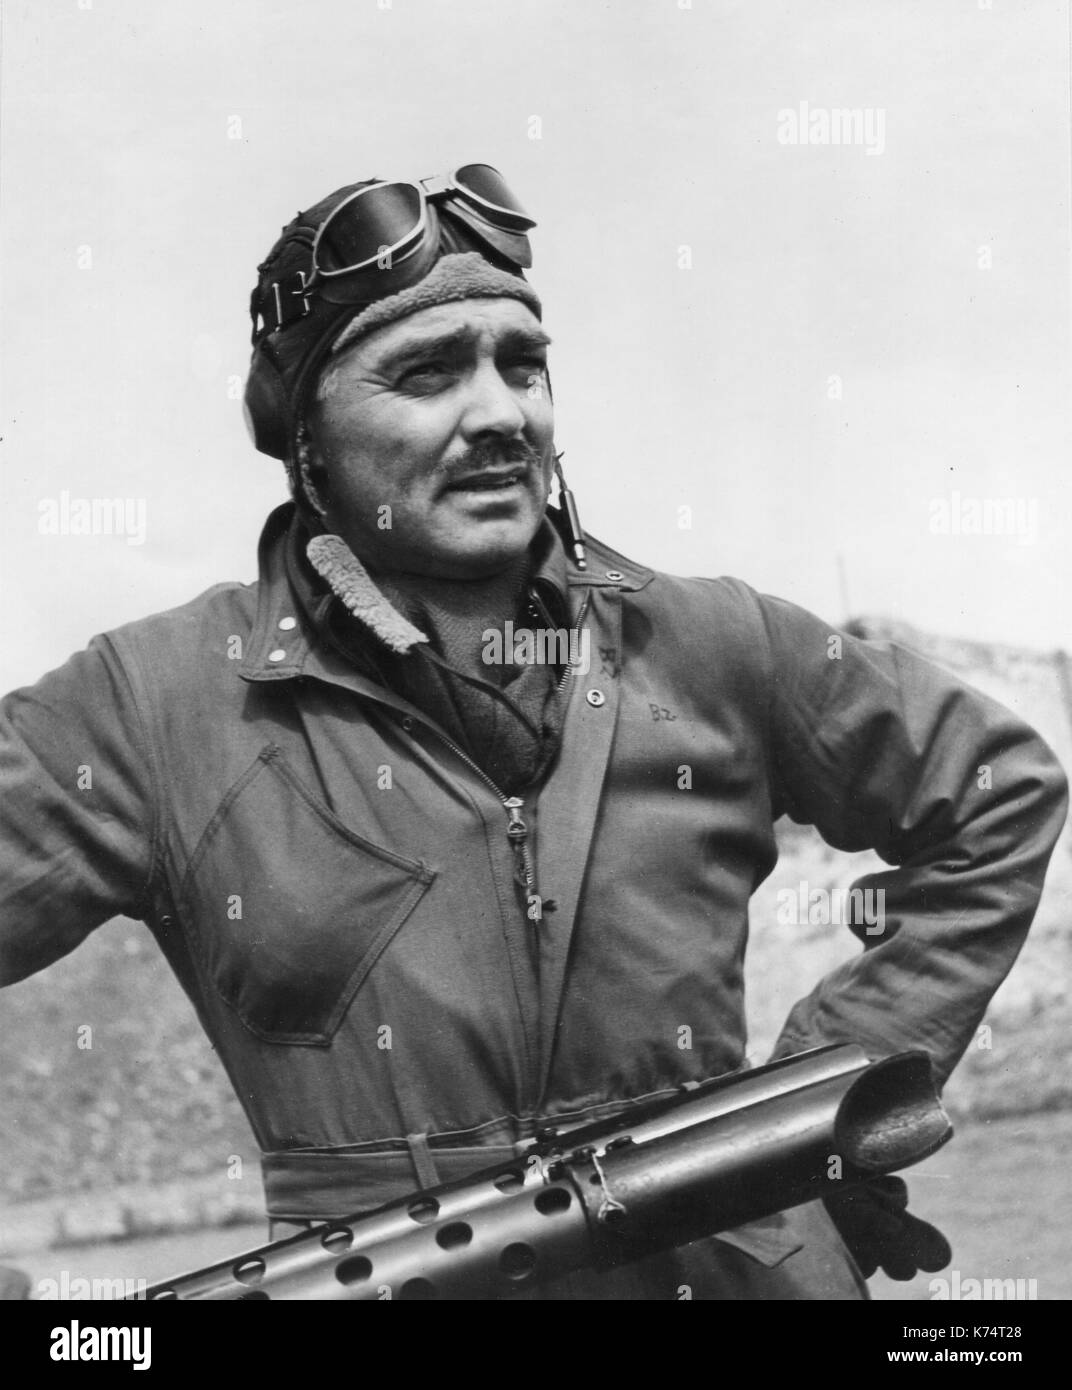 Capt Clark Gable, American actor and US Army Air Corps gunner with the 351st Bomb Group based in England, flew five missions over German-occupied targets in Europe, England, 1943. Stock Photo